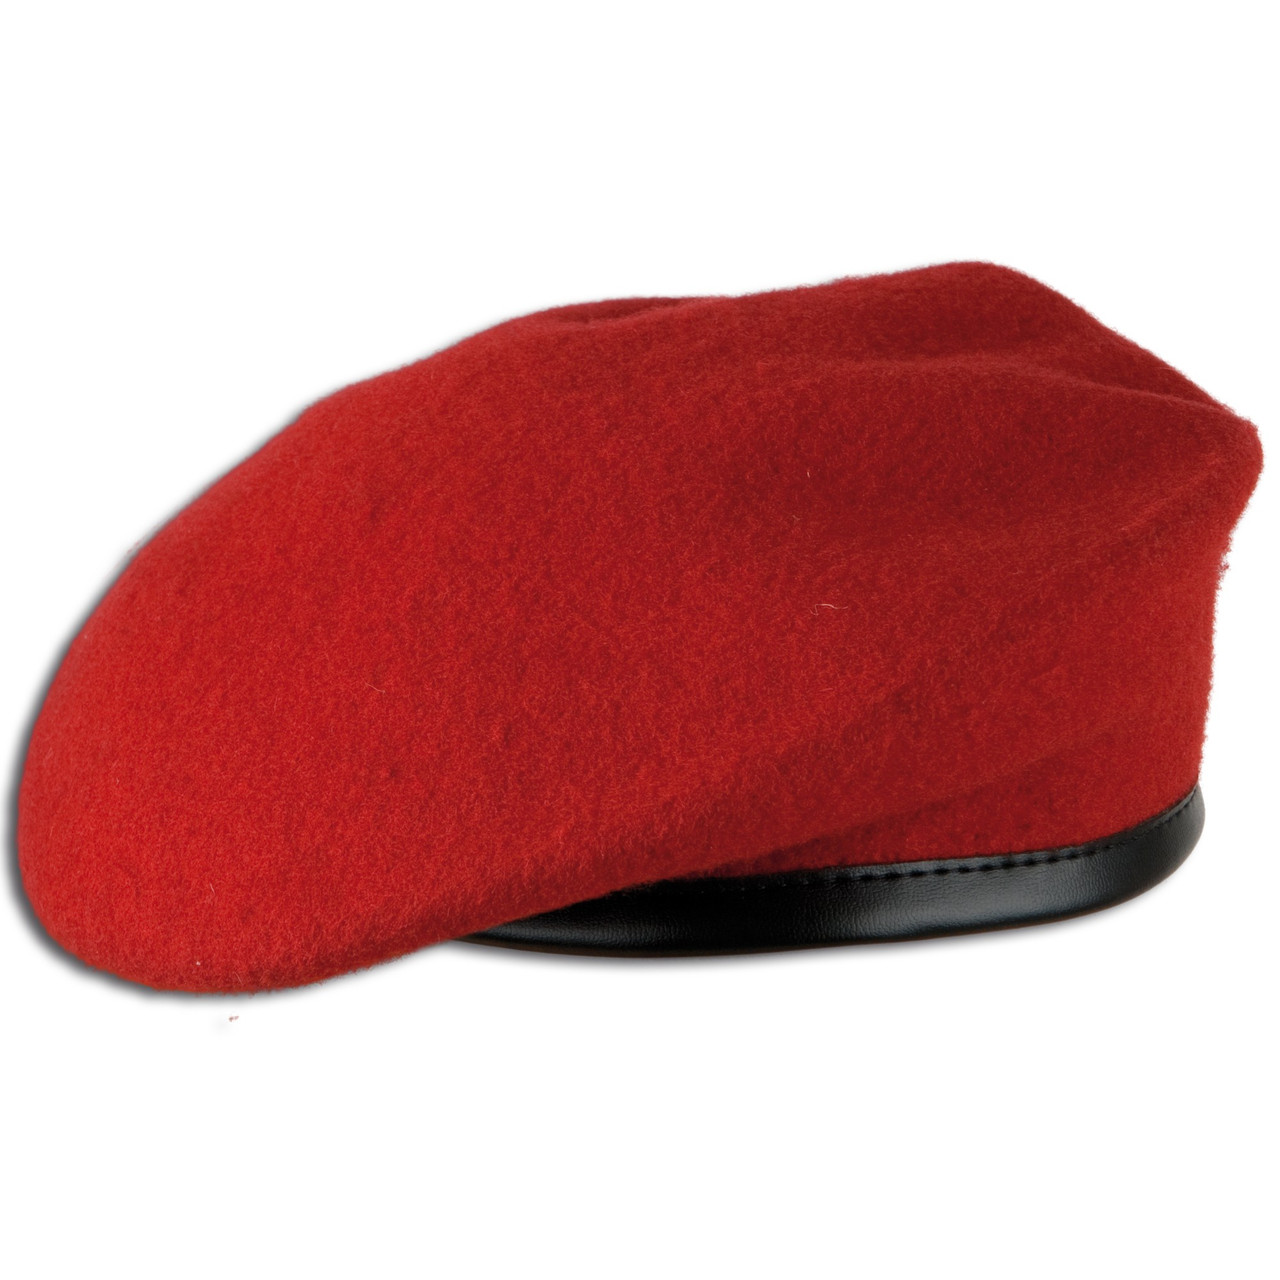 Beret meaning